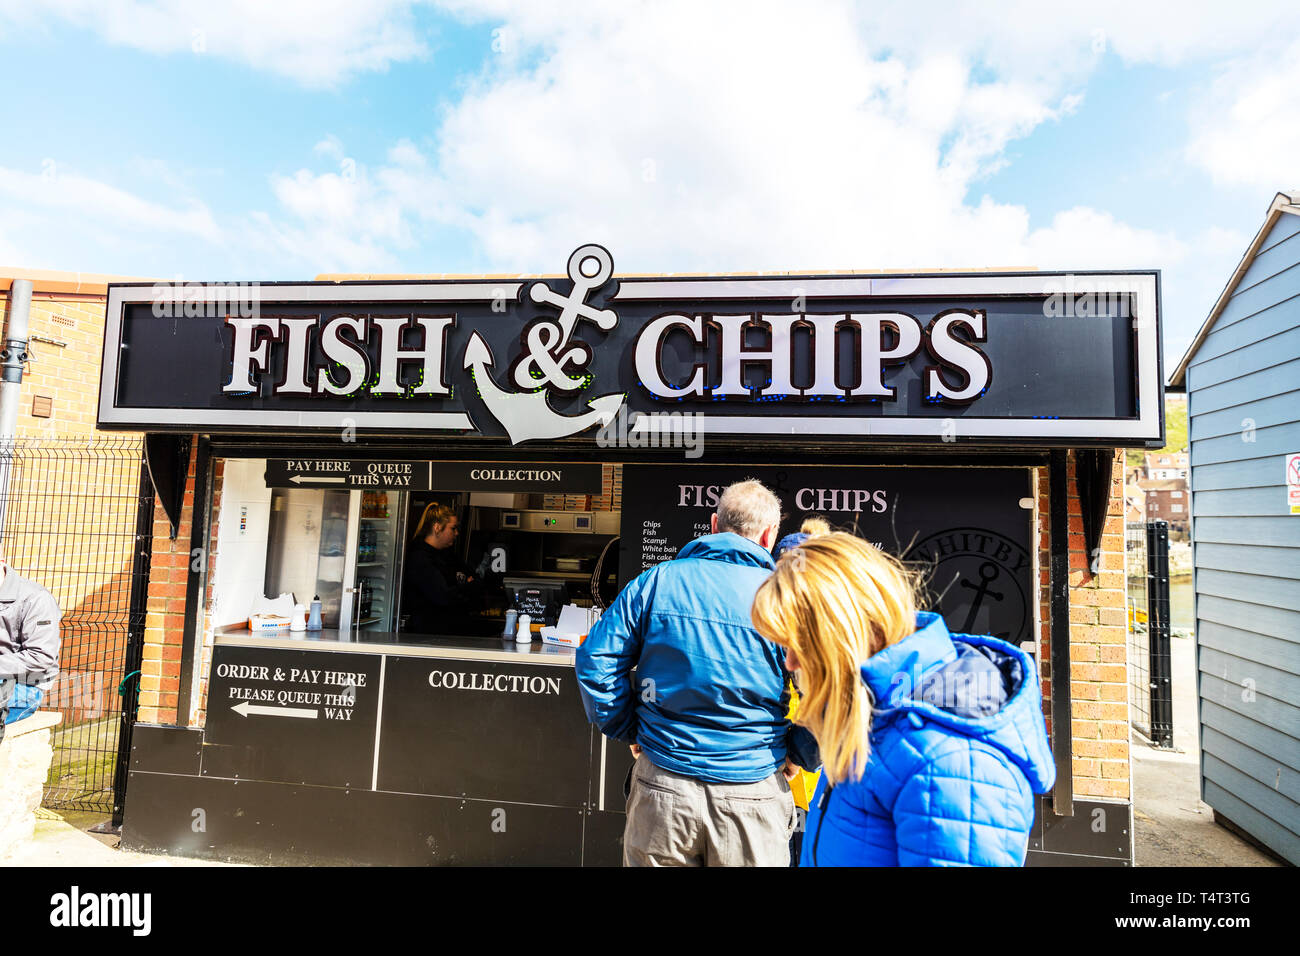 Fish & Chip van, fish and chips, fish and chips stall Whitby, fish and chips Whitby, fish & chips Whitby, stall, van, Whitby, Yorkshire, UK, England Stock Photo